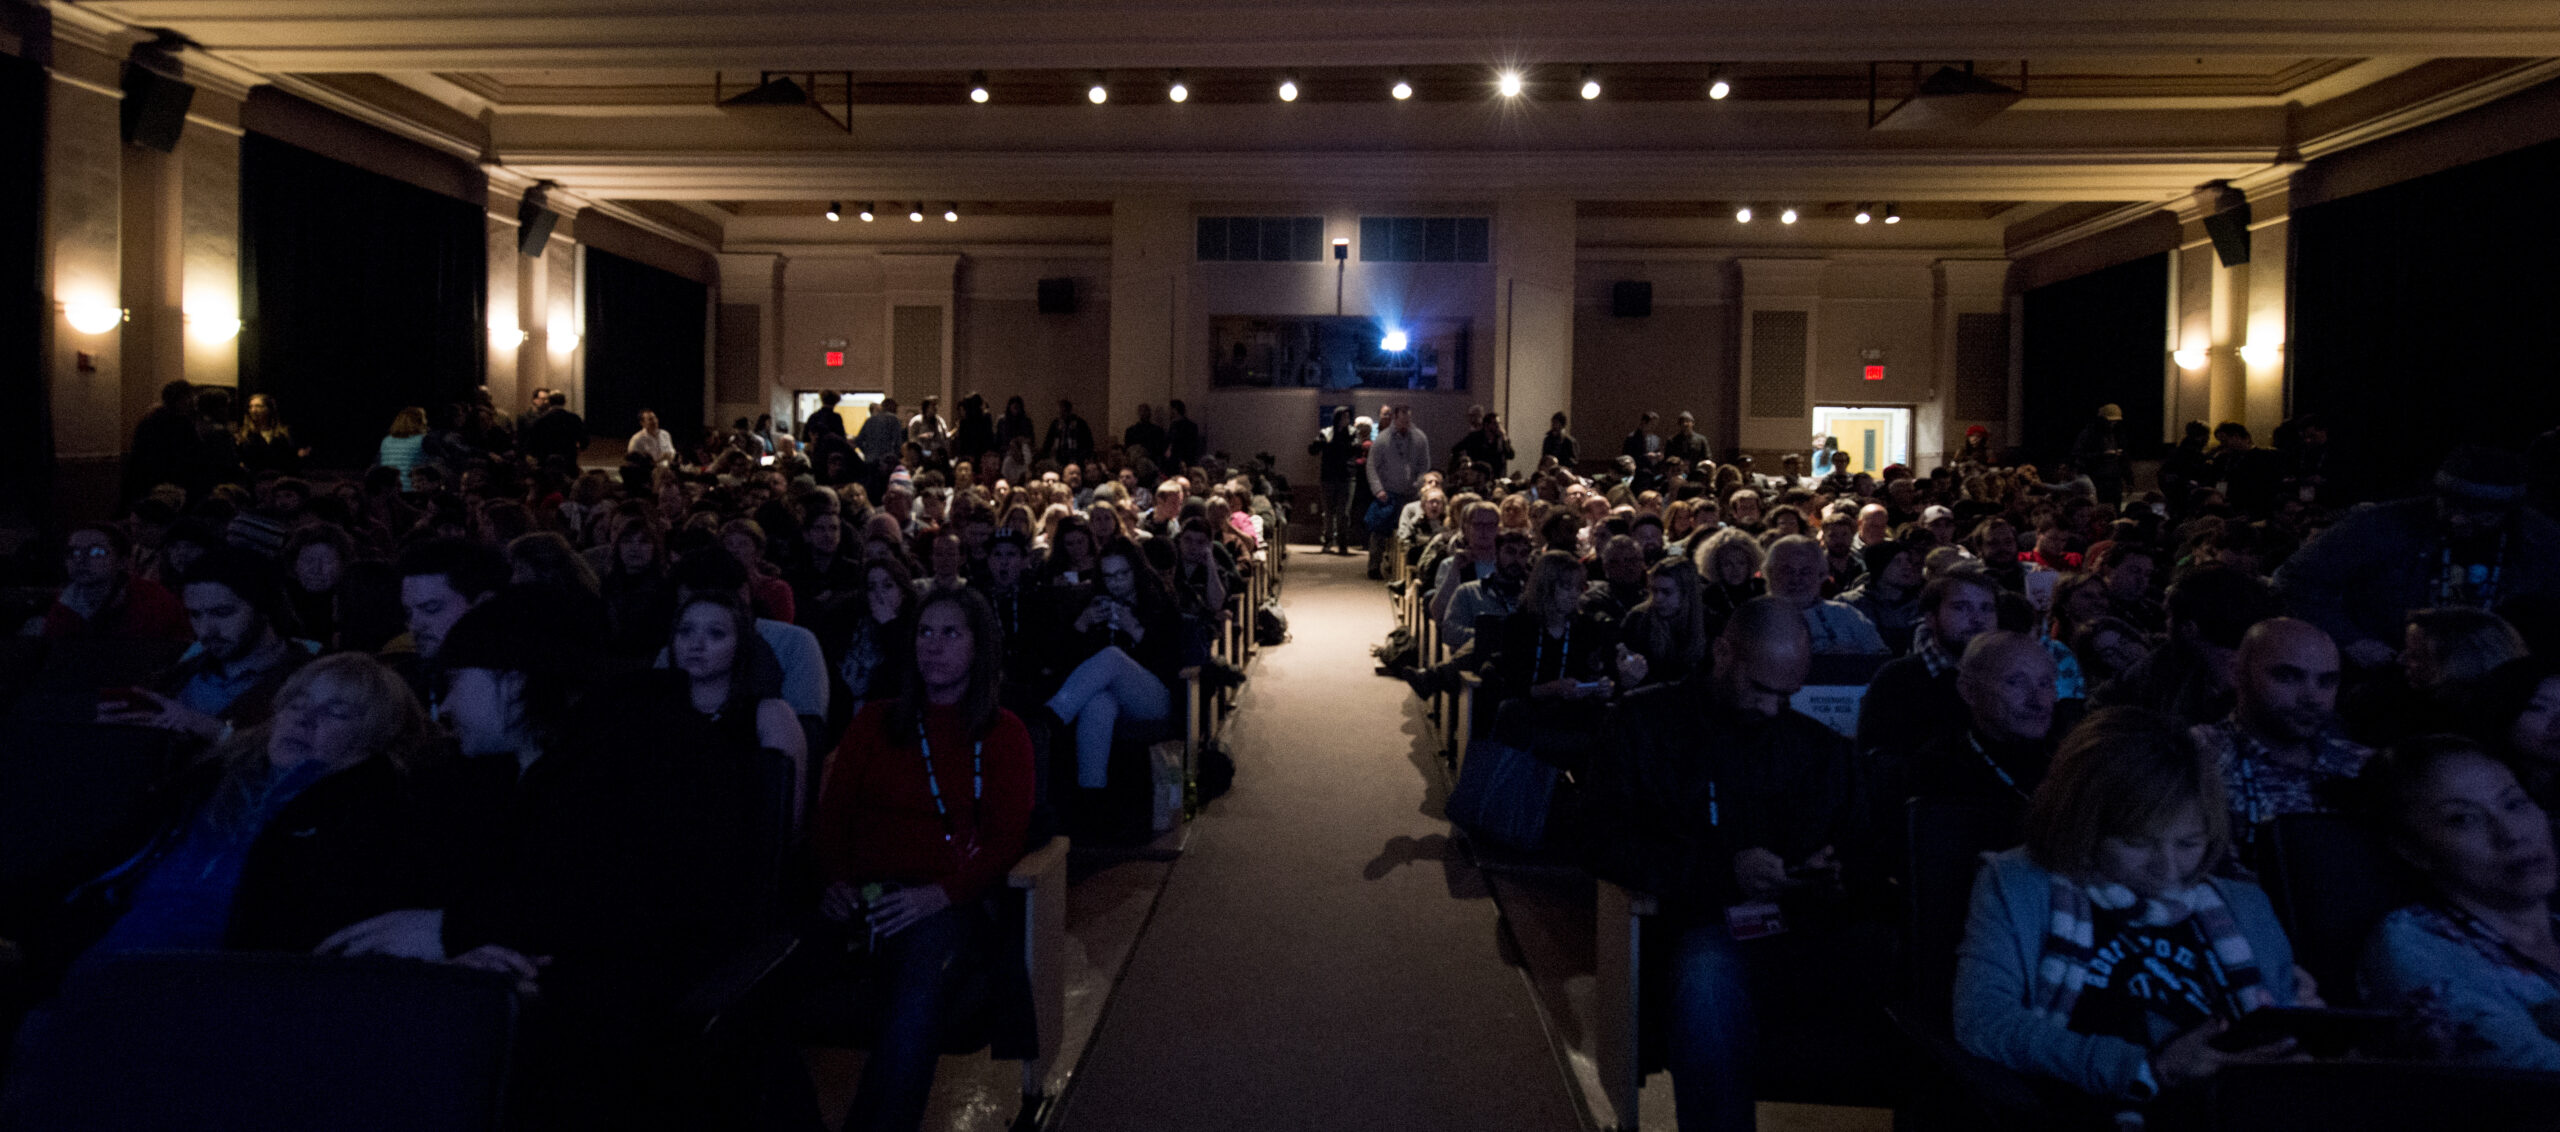 Sundance Film Festival. Watch videos live from the event.